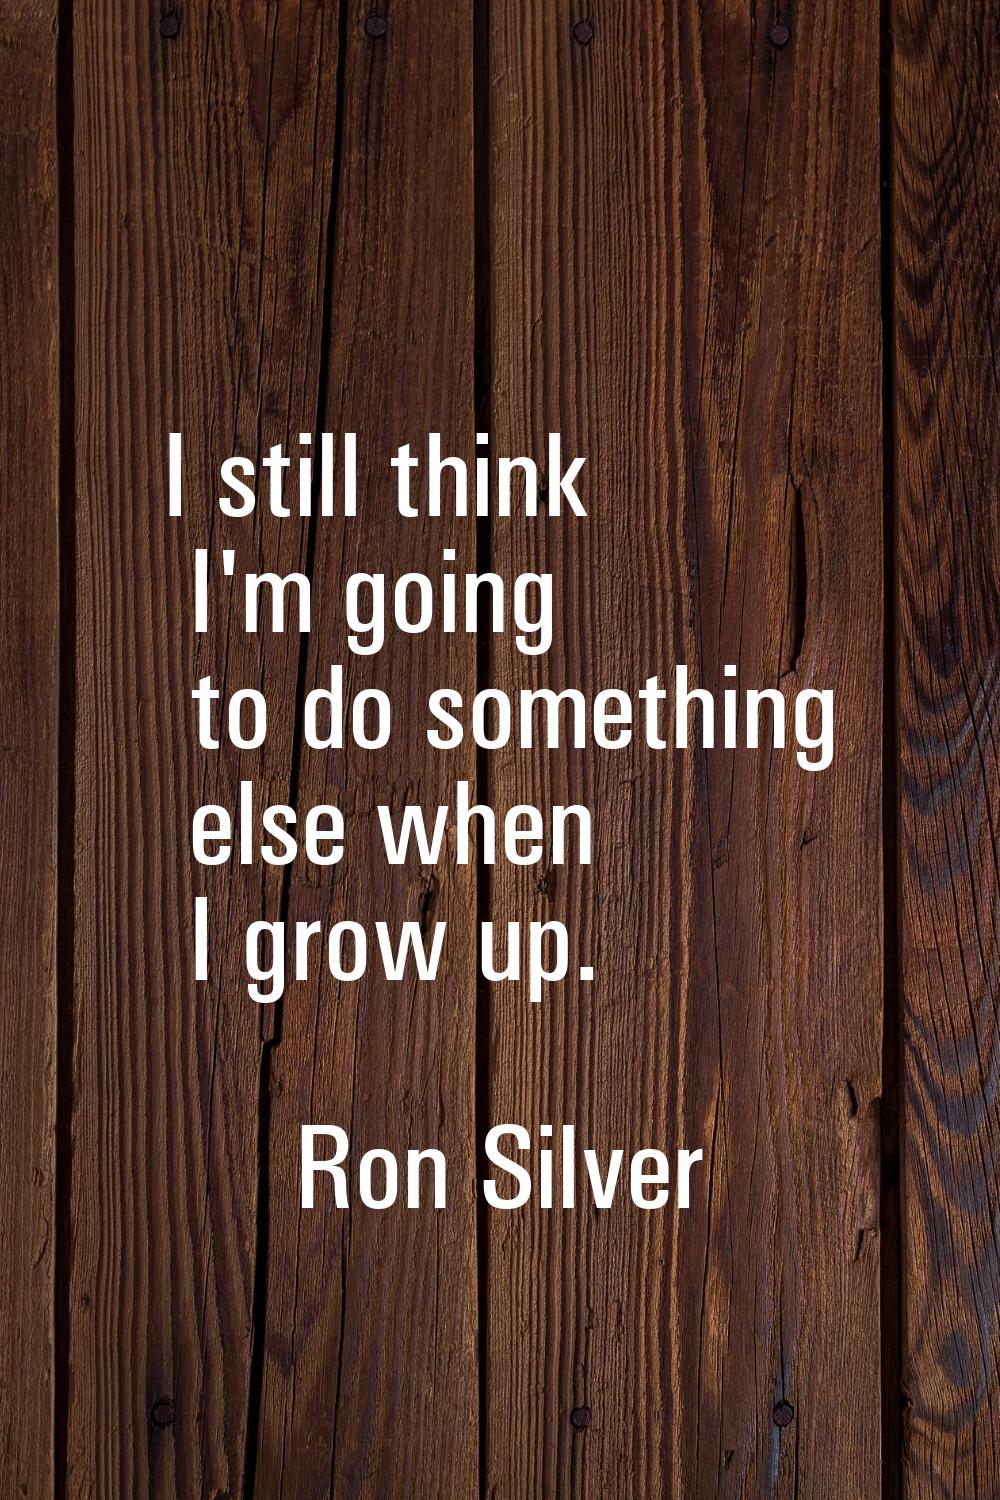 I still think I'm going to do something else when I grow up.